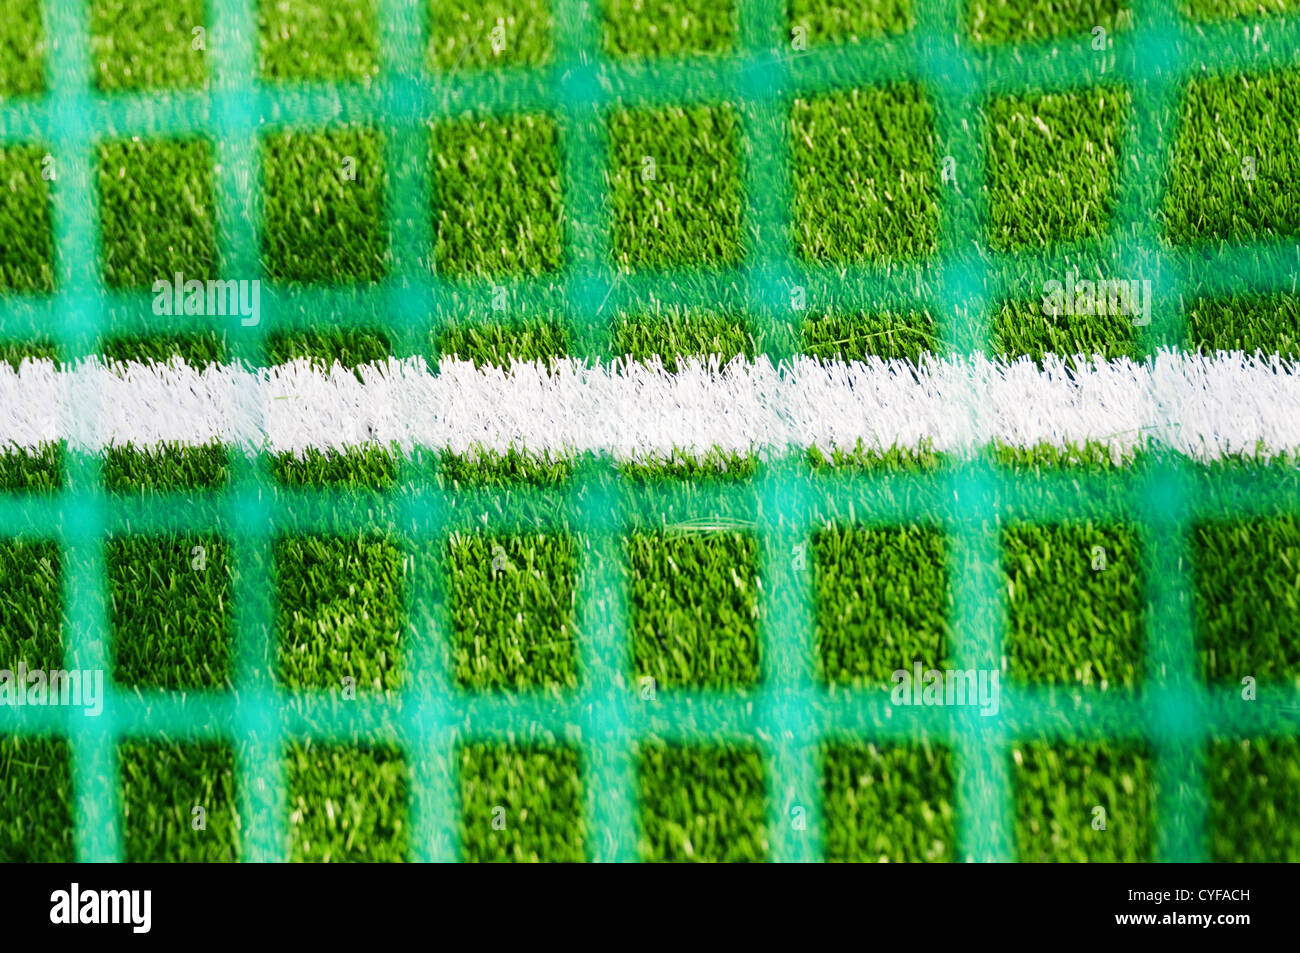 White line on football field with blurried mesh on foreground Stock Photo